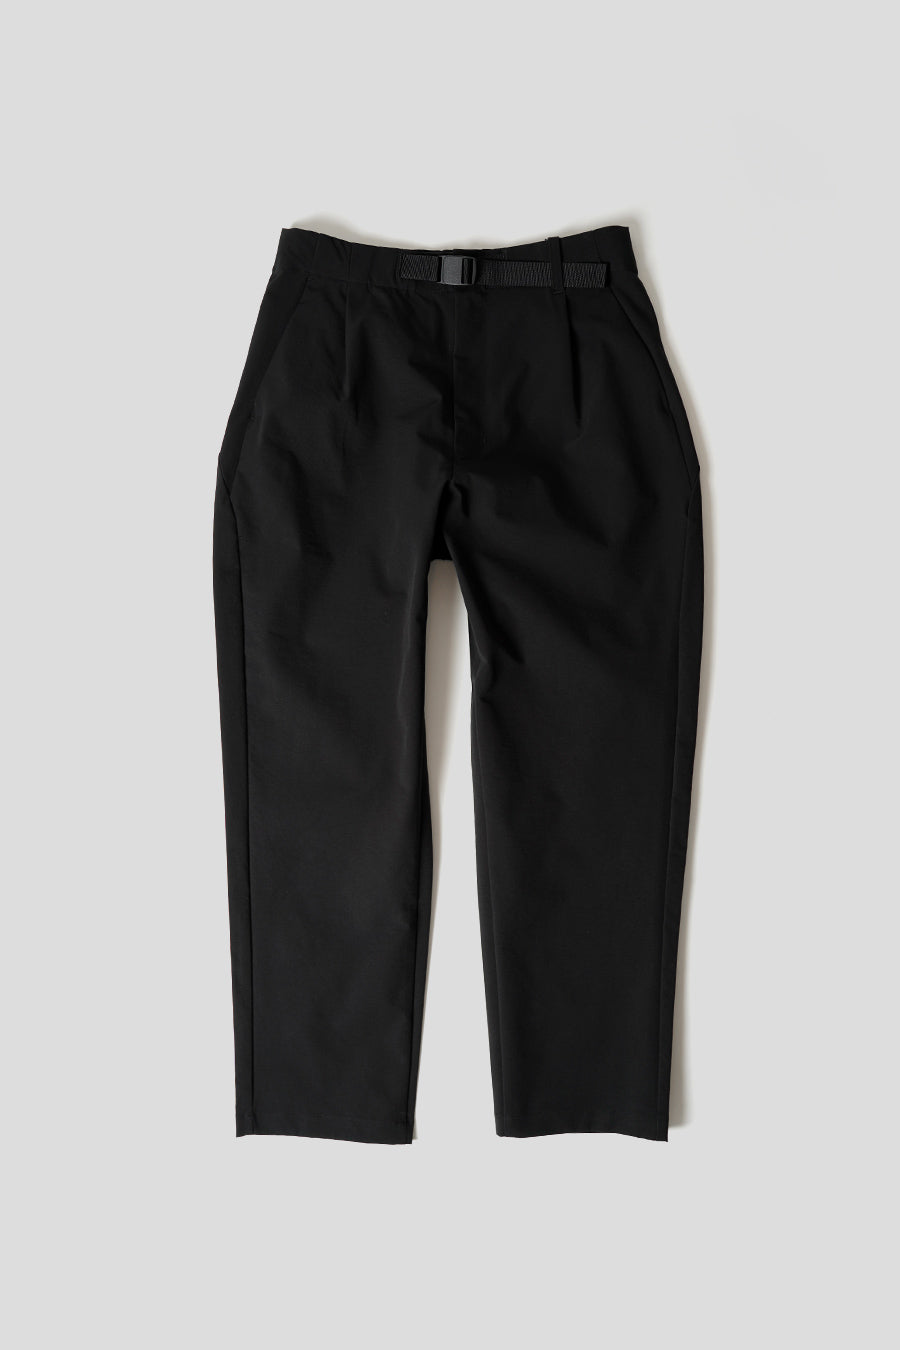 GOLDWIN - BLACK ONE TUCK TAPERED STRETCH PANTS – LE LABO STORE